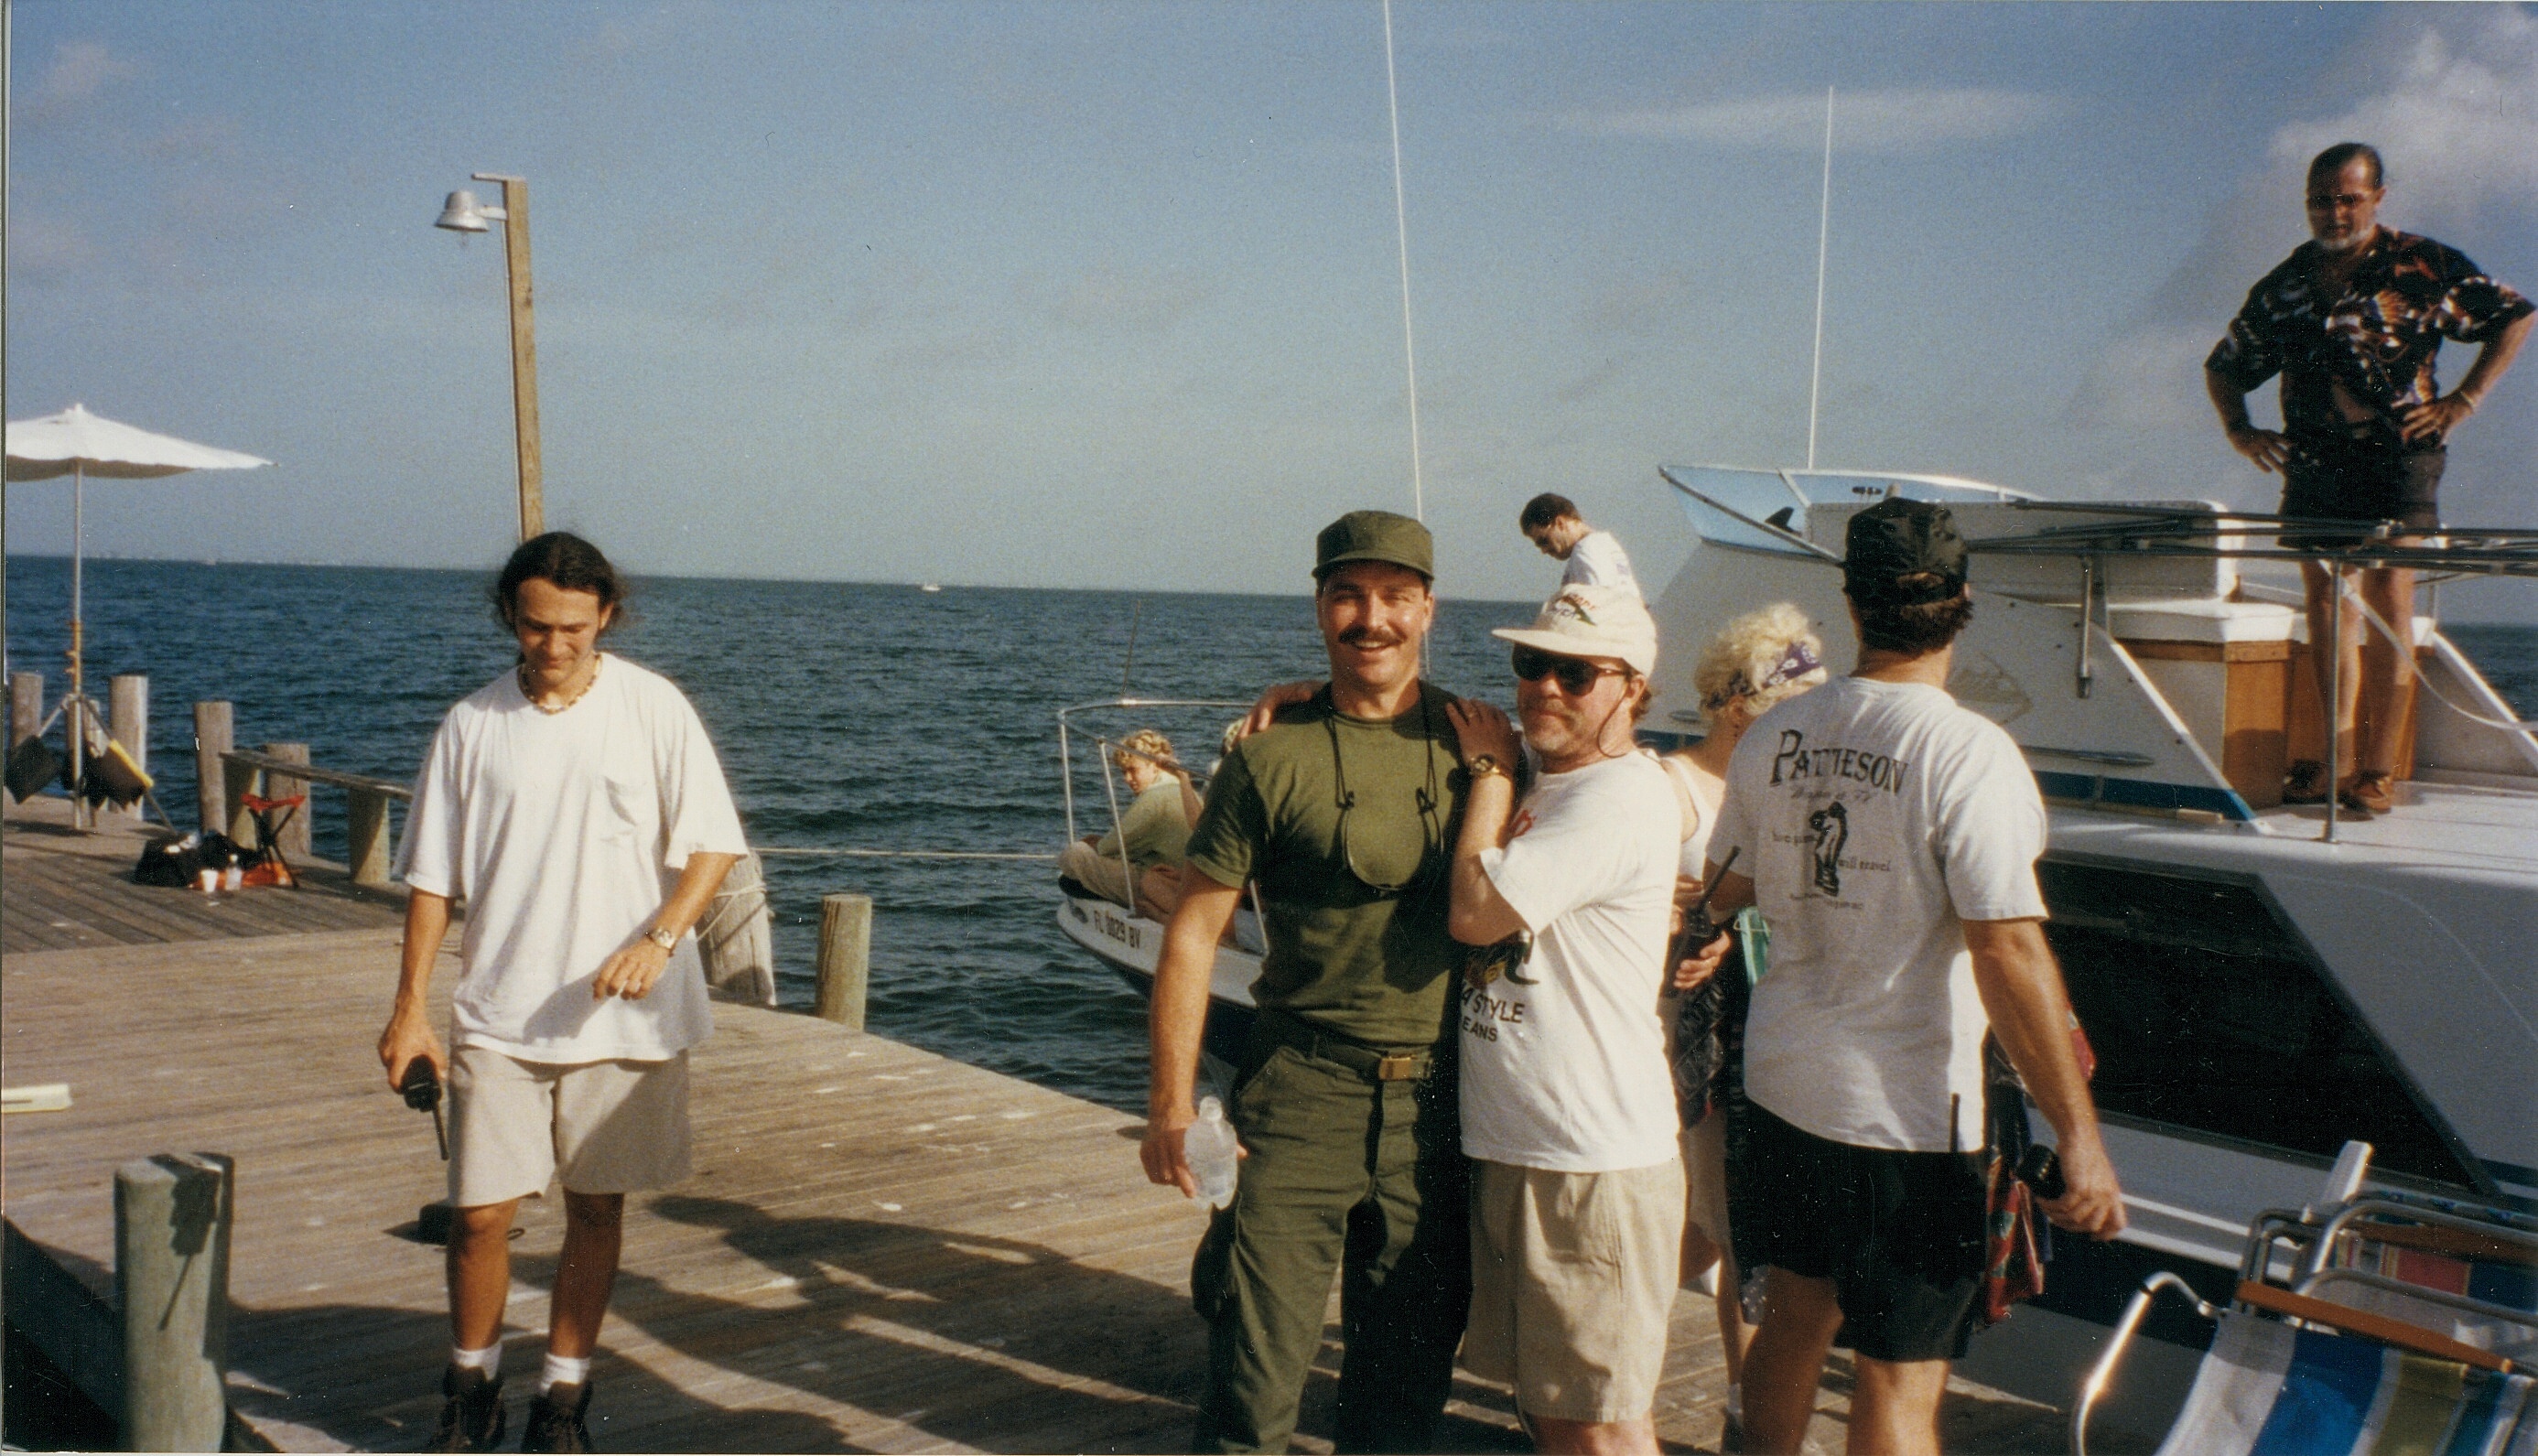 Tom Logan directing on the set of ESCAPE FROM CUBA in the Gulf of Mexico.